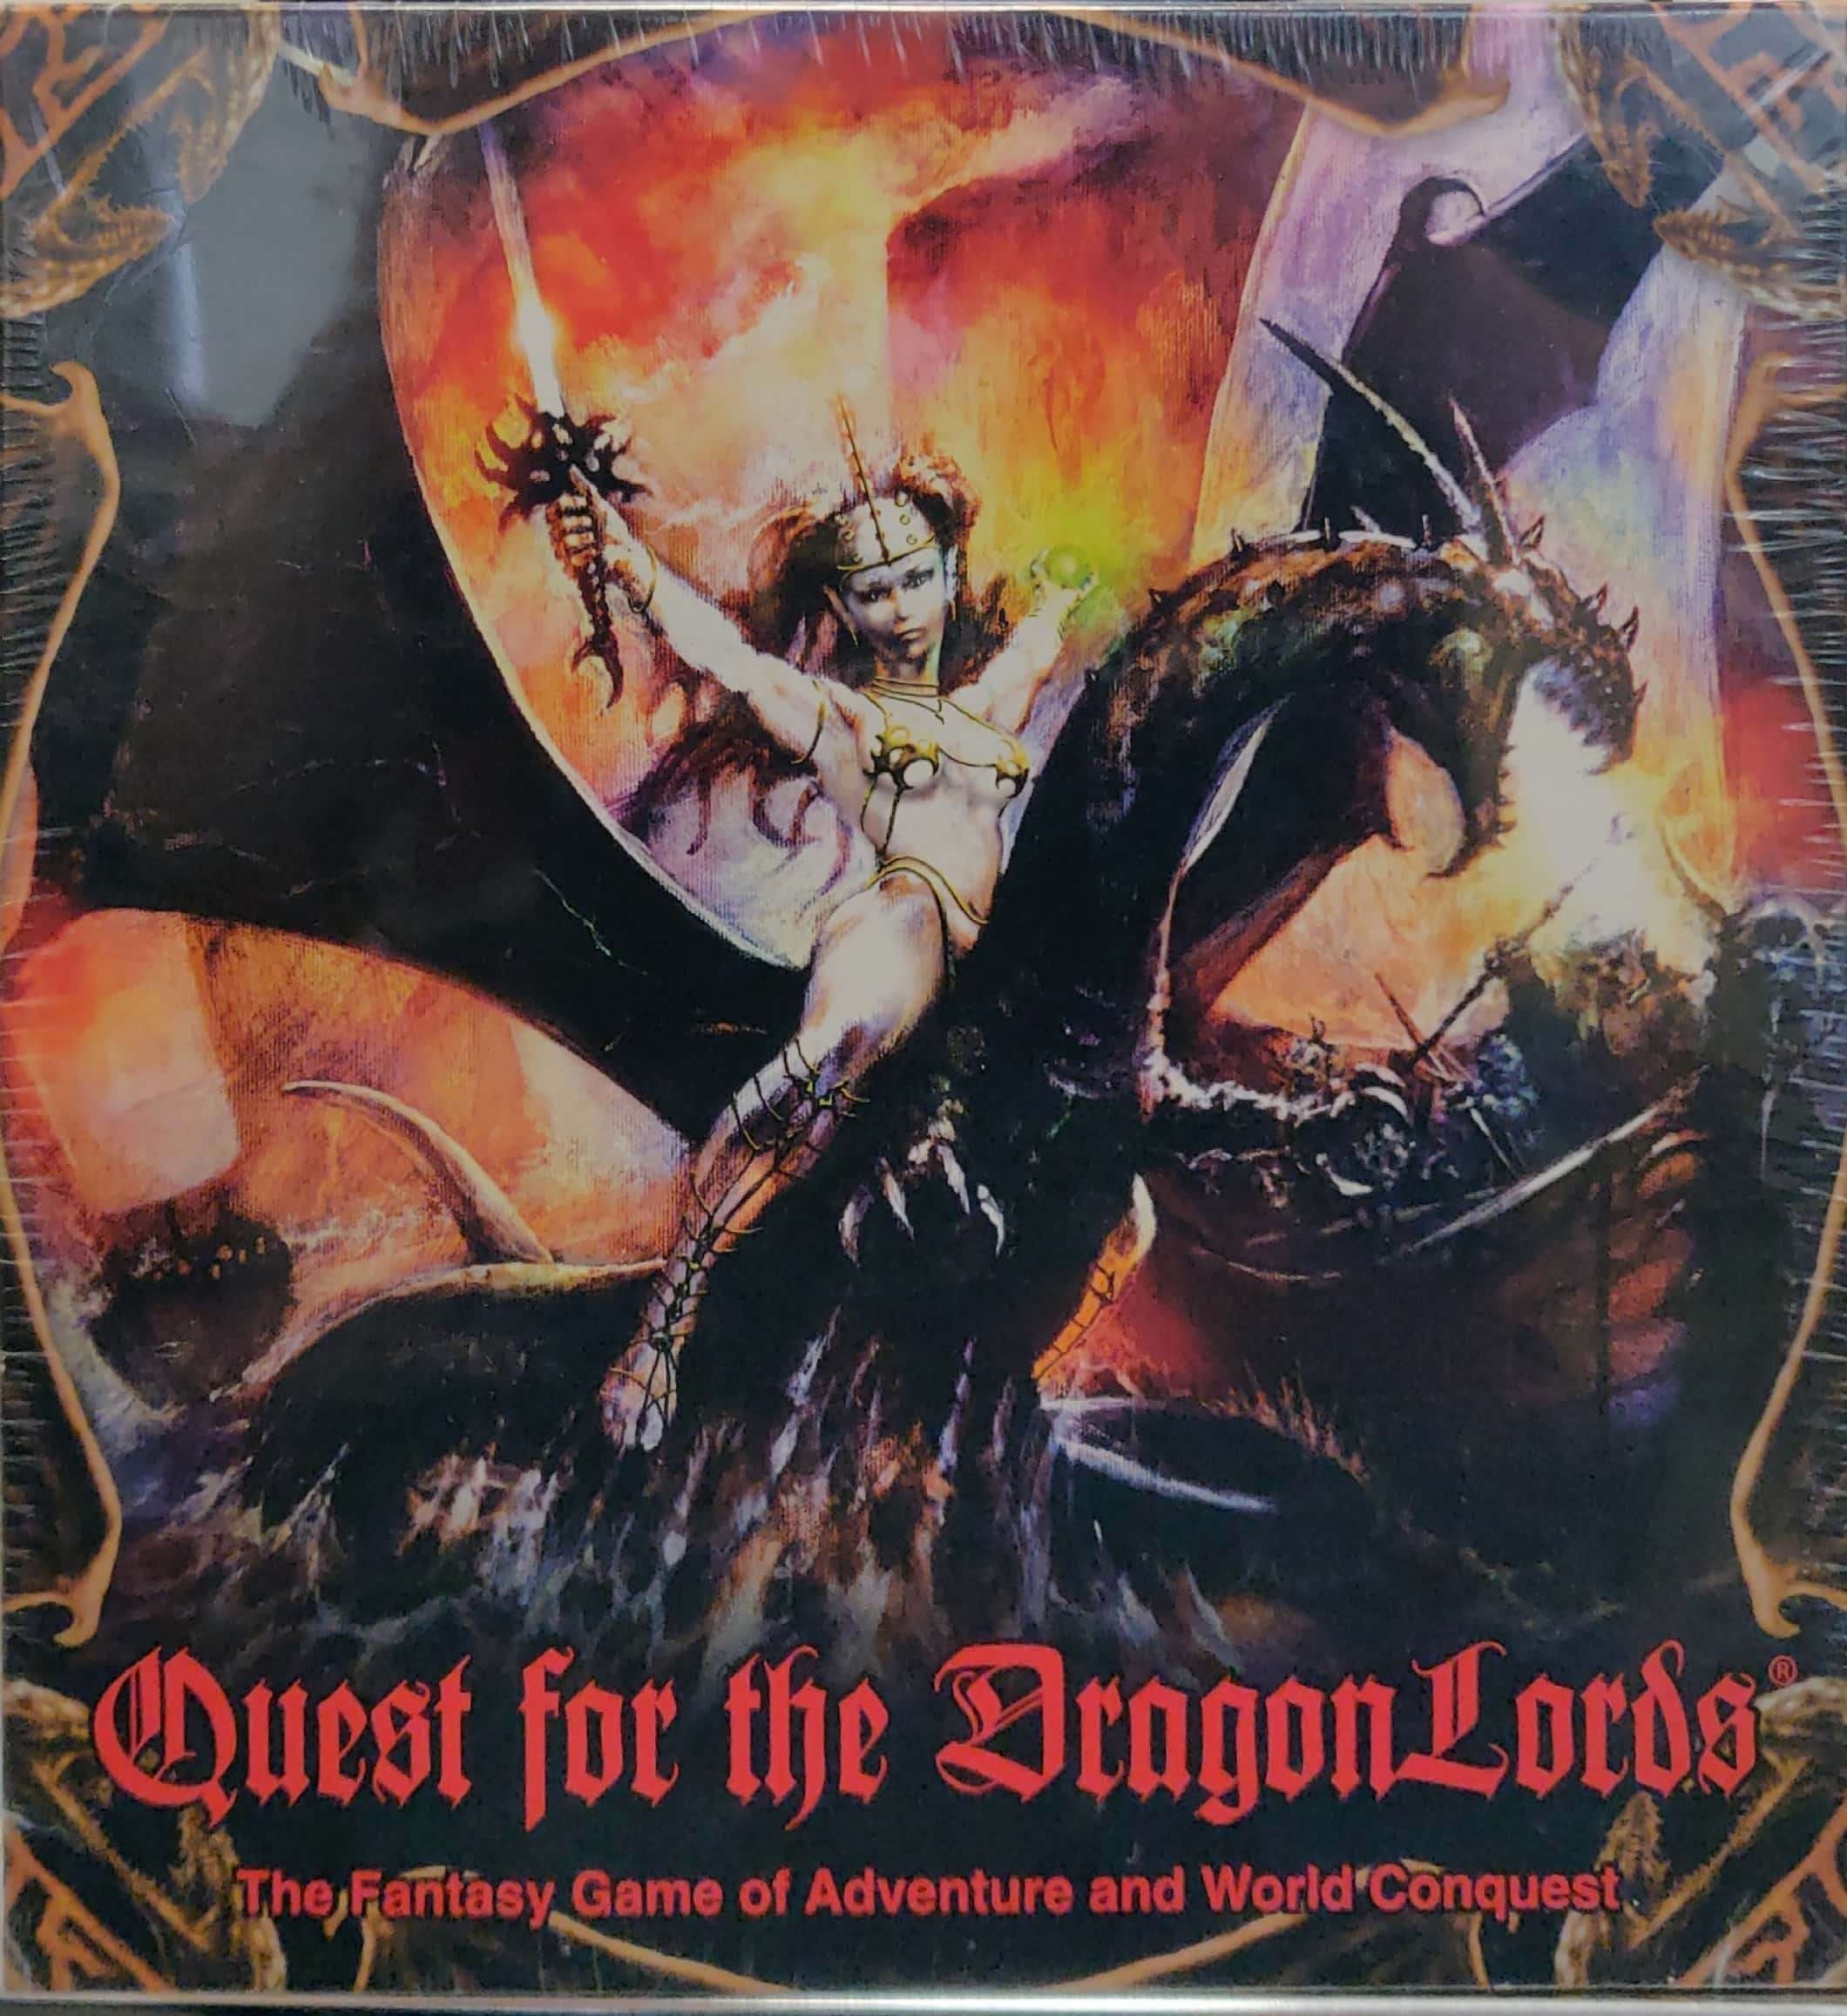 Quest for the Dragonlords